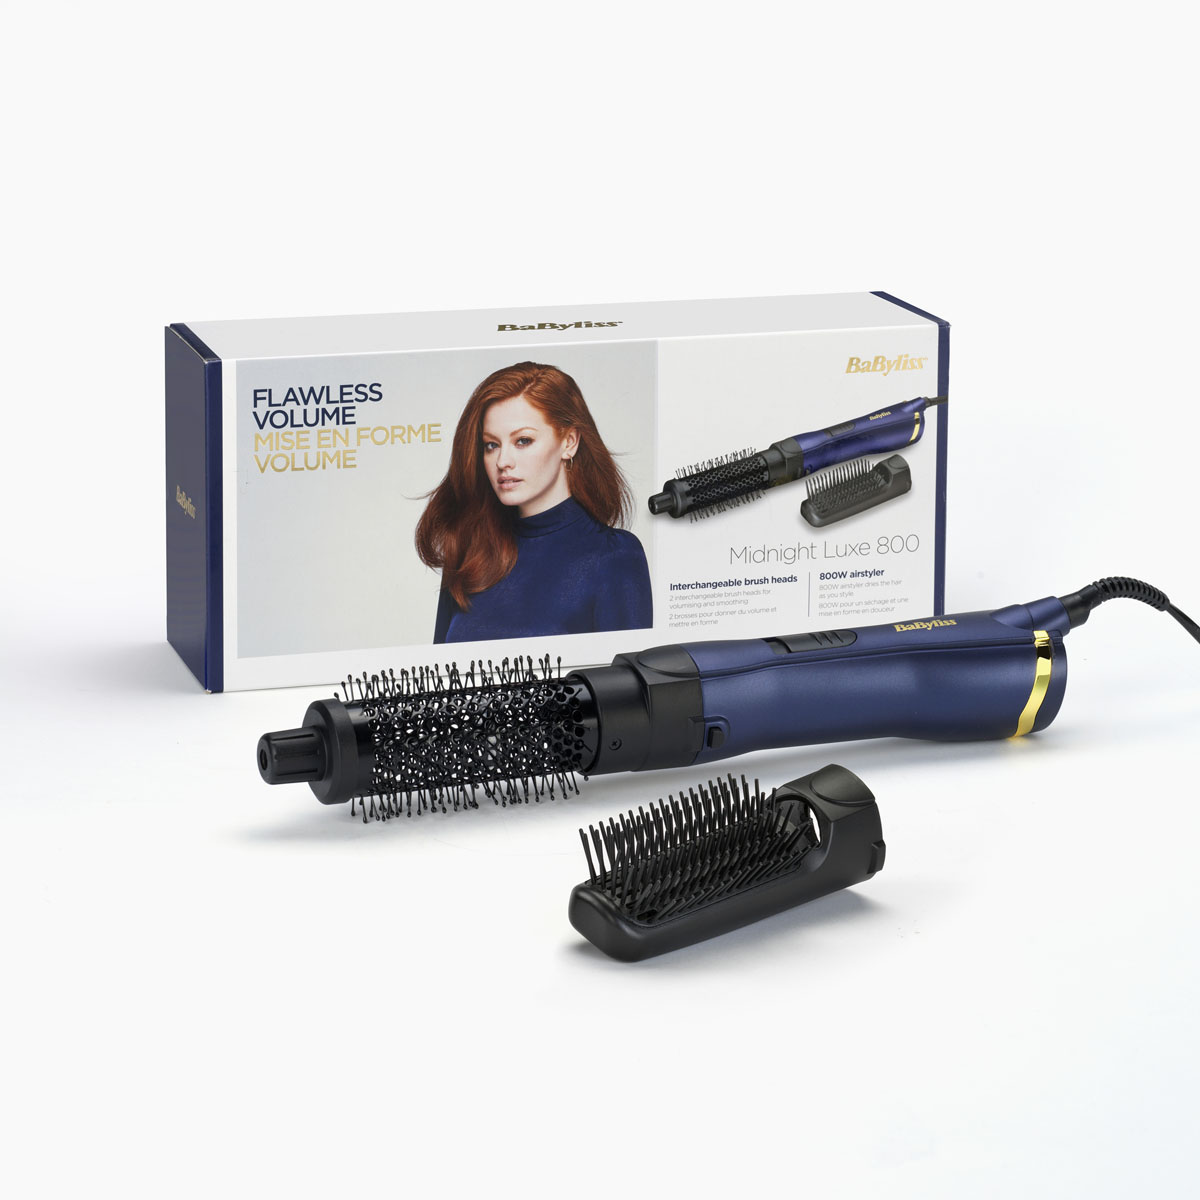 Midnight Luxe 800 | BaByliss Finland